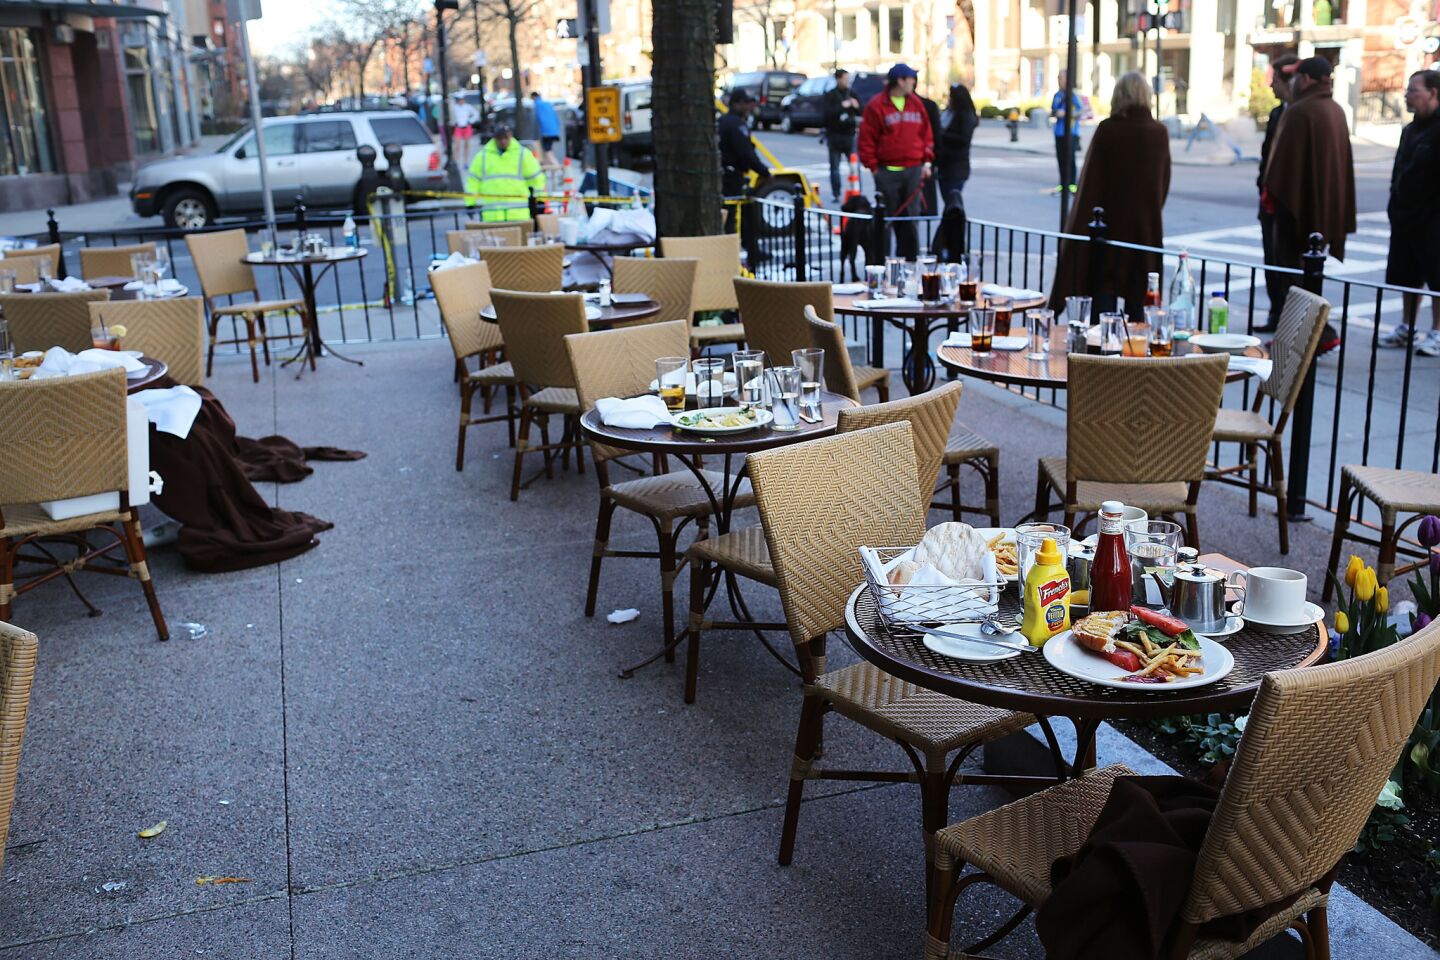 The unfinished meals of fleeing customers are left on tables at an outdoor restaurant near the scene of twin bombings at the Boston Marathon.